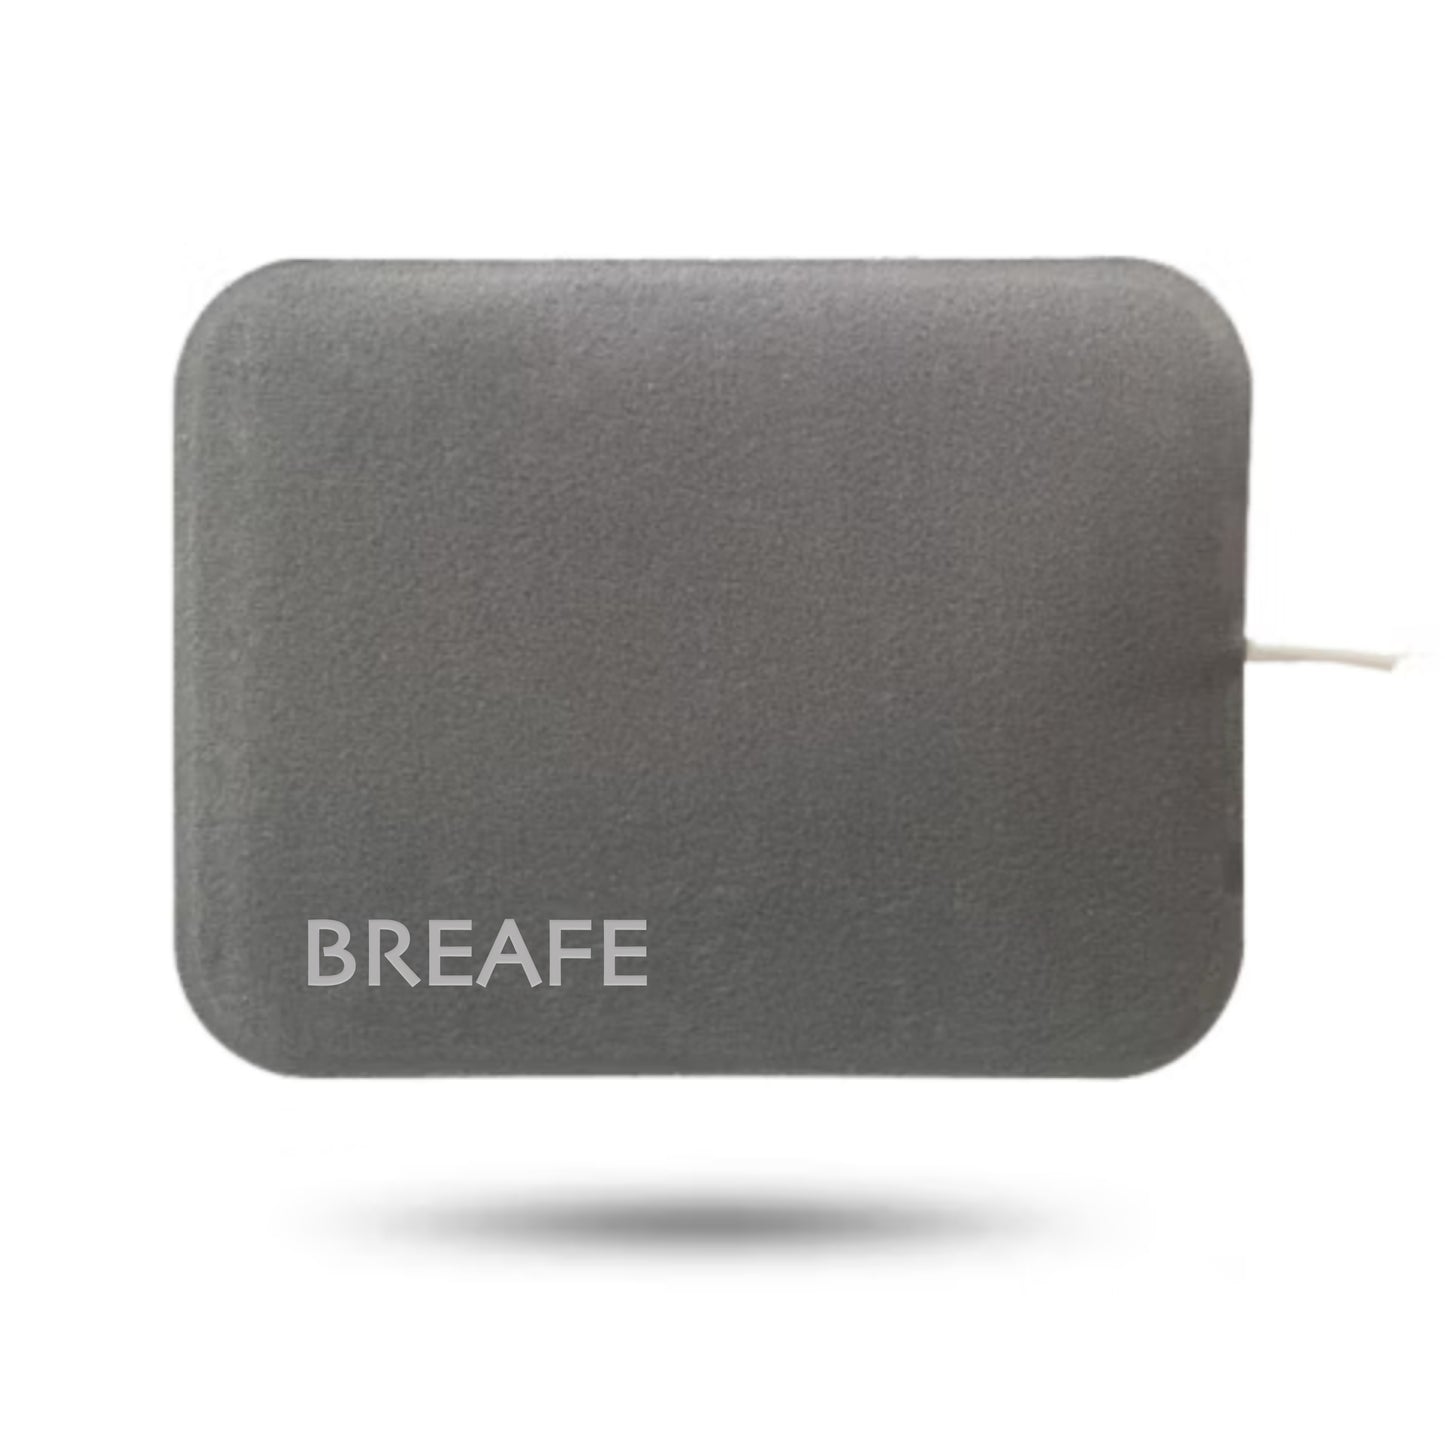 BREAFE Maternity Support Belts for Medical Purposes